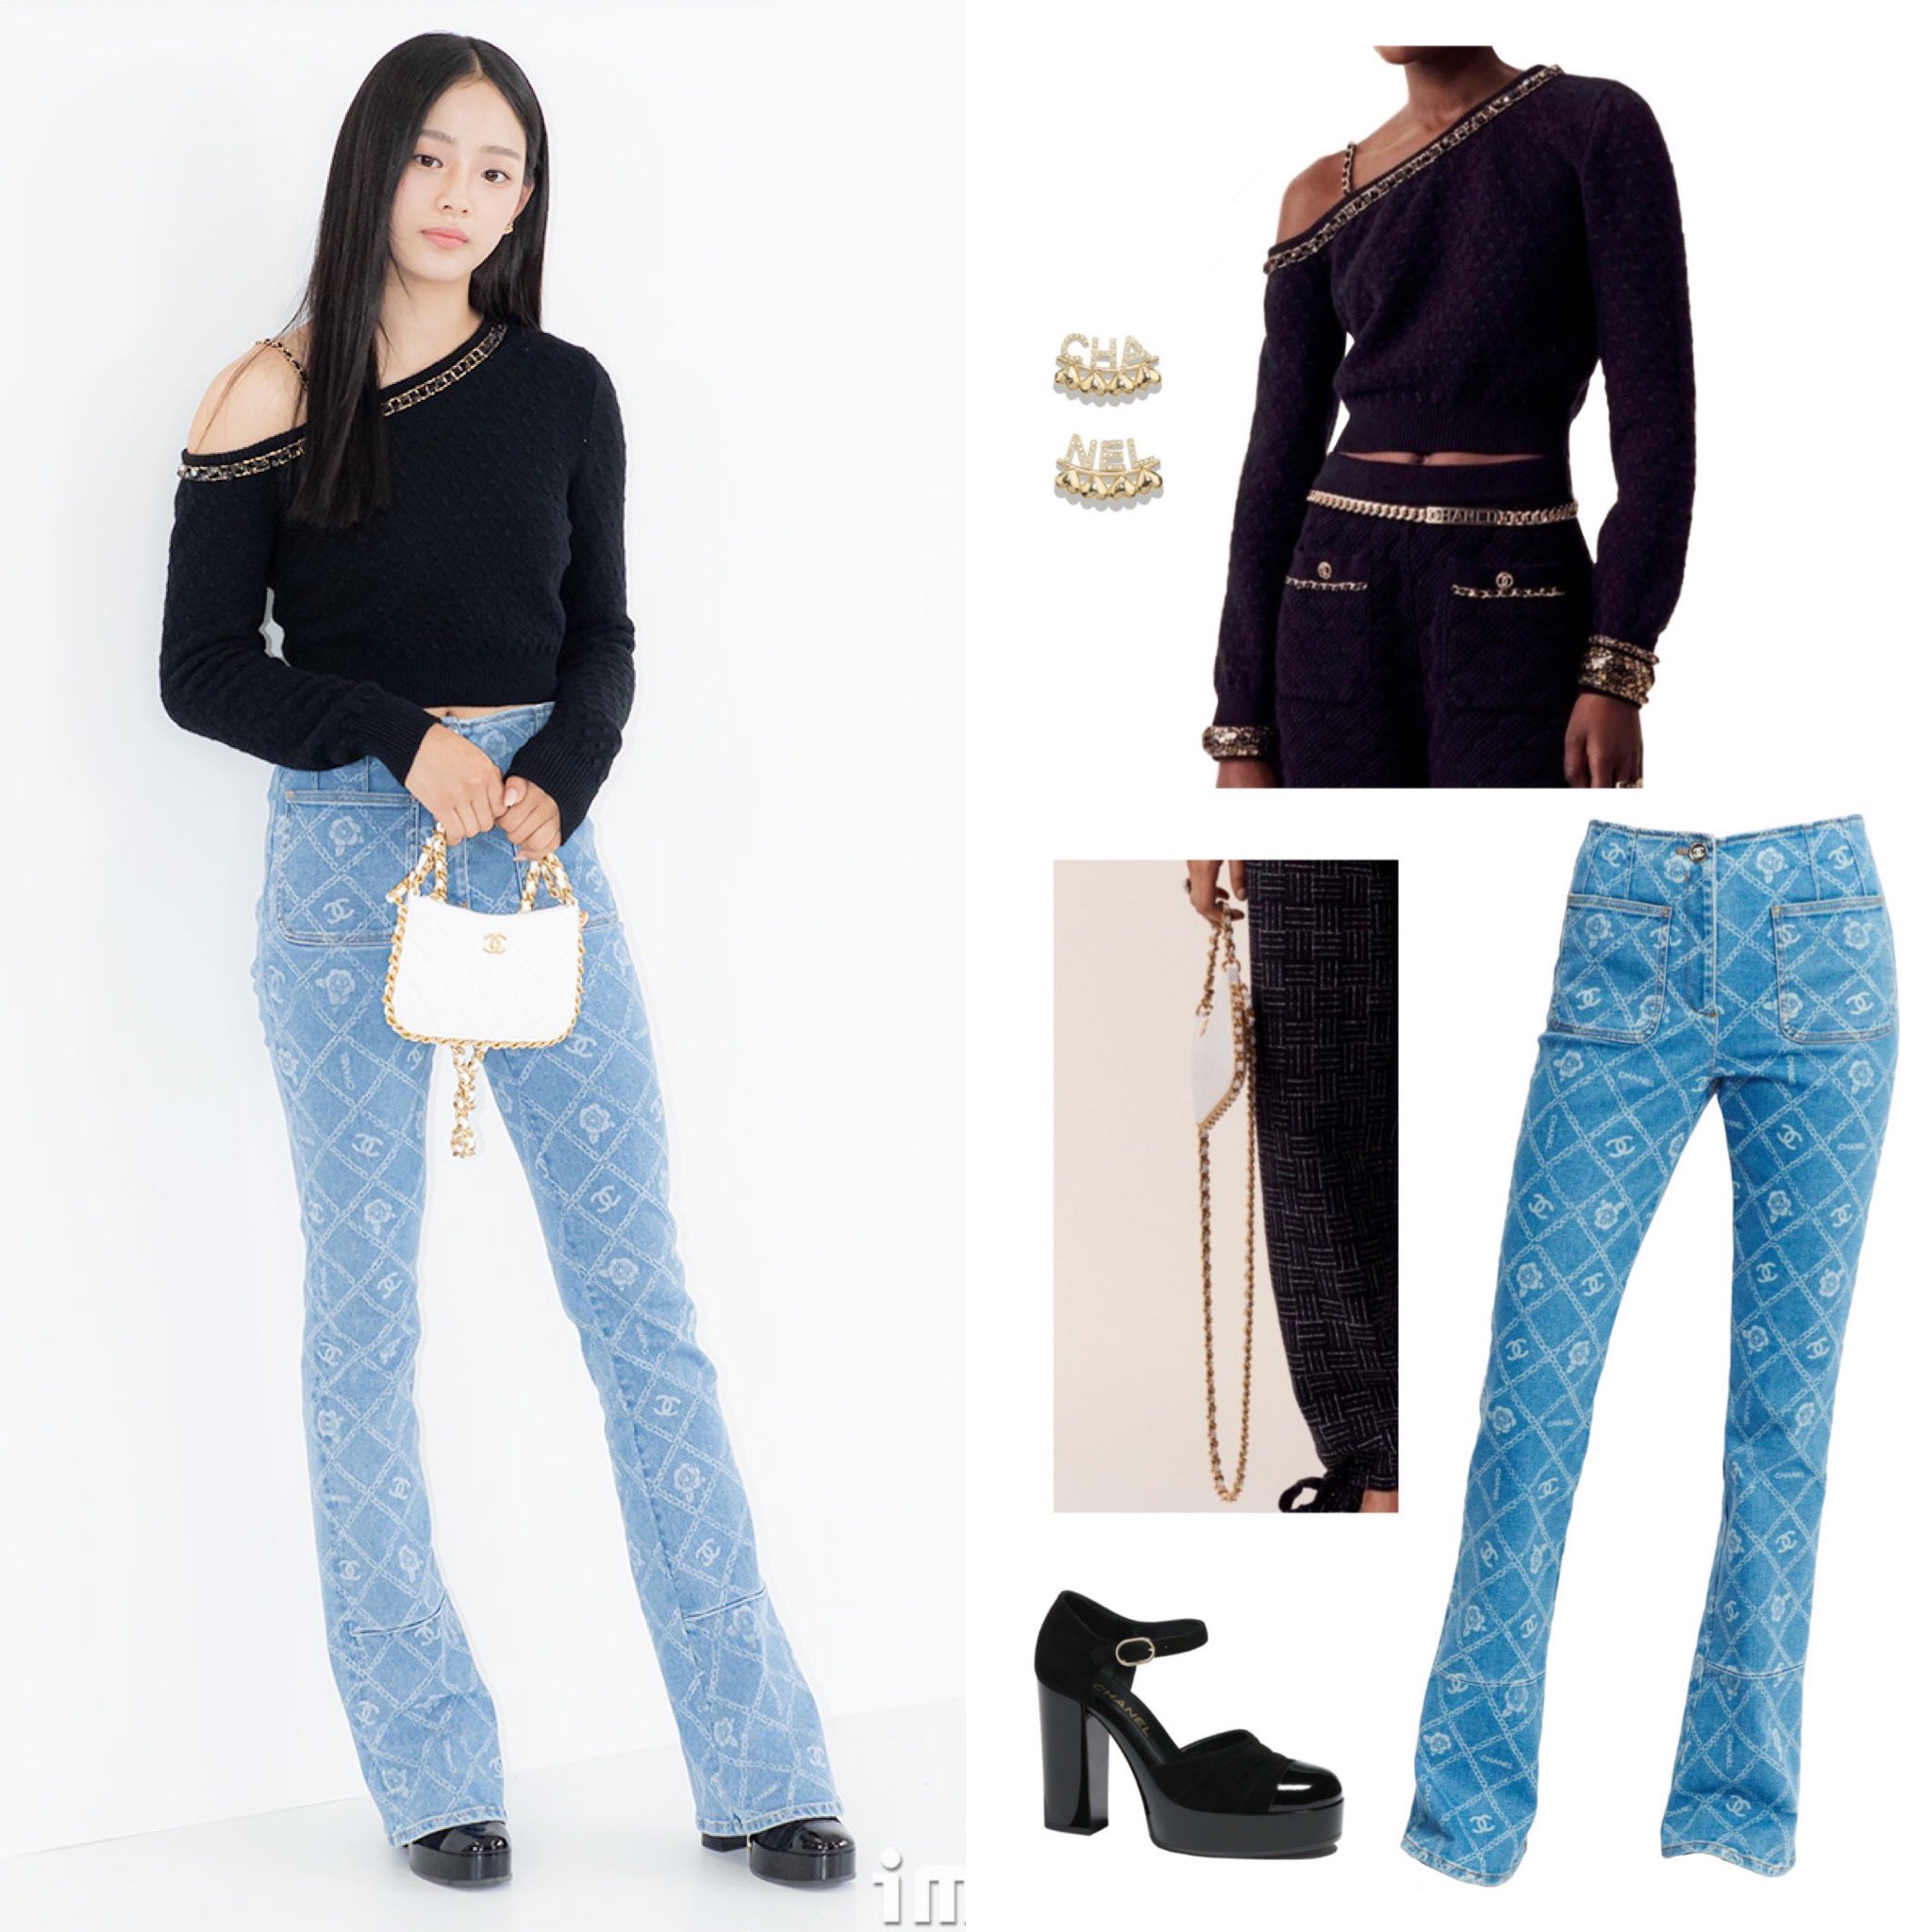 NewJeans Outfits on X: 230628 Chanel Pop-Up Store Chanel Pre-Fall 2023  Pullover SS23 Pre-Collection Stud Earrings $675 Pre-Fall 2023 Bag 2022/23  Métiers D'Art Jeans $2,150 SS23 Pre-Collection Mary Janes $1,300 #NewJeans  #뉴진스 #